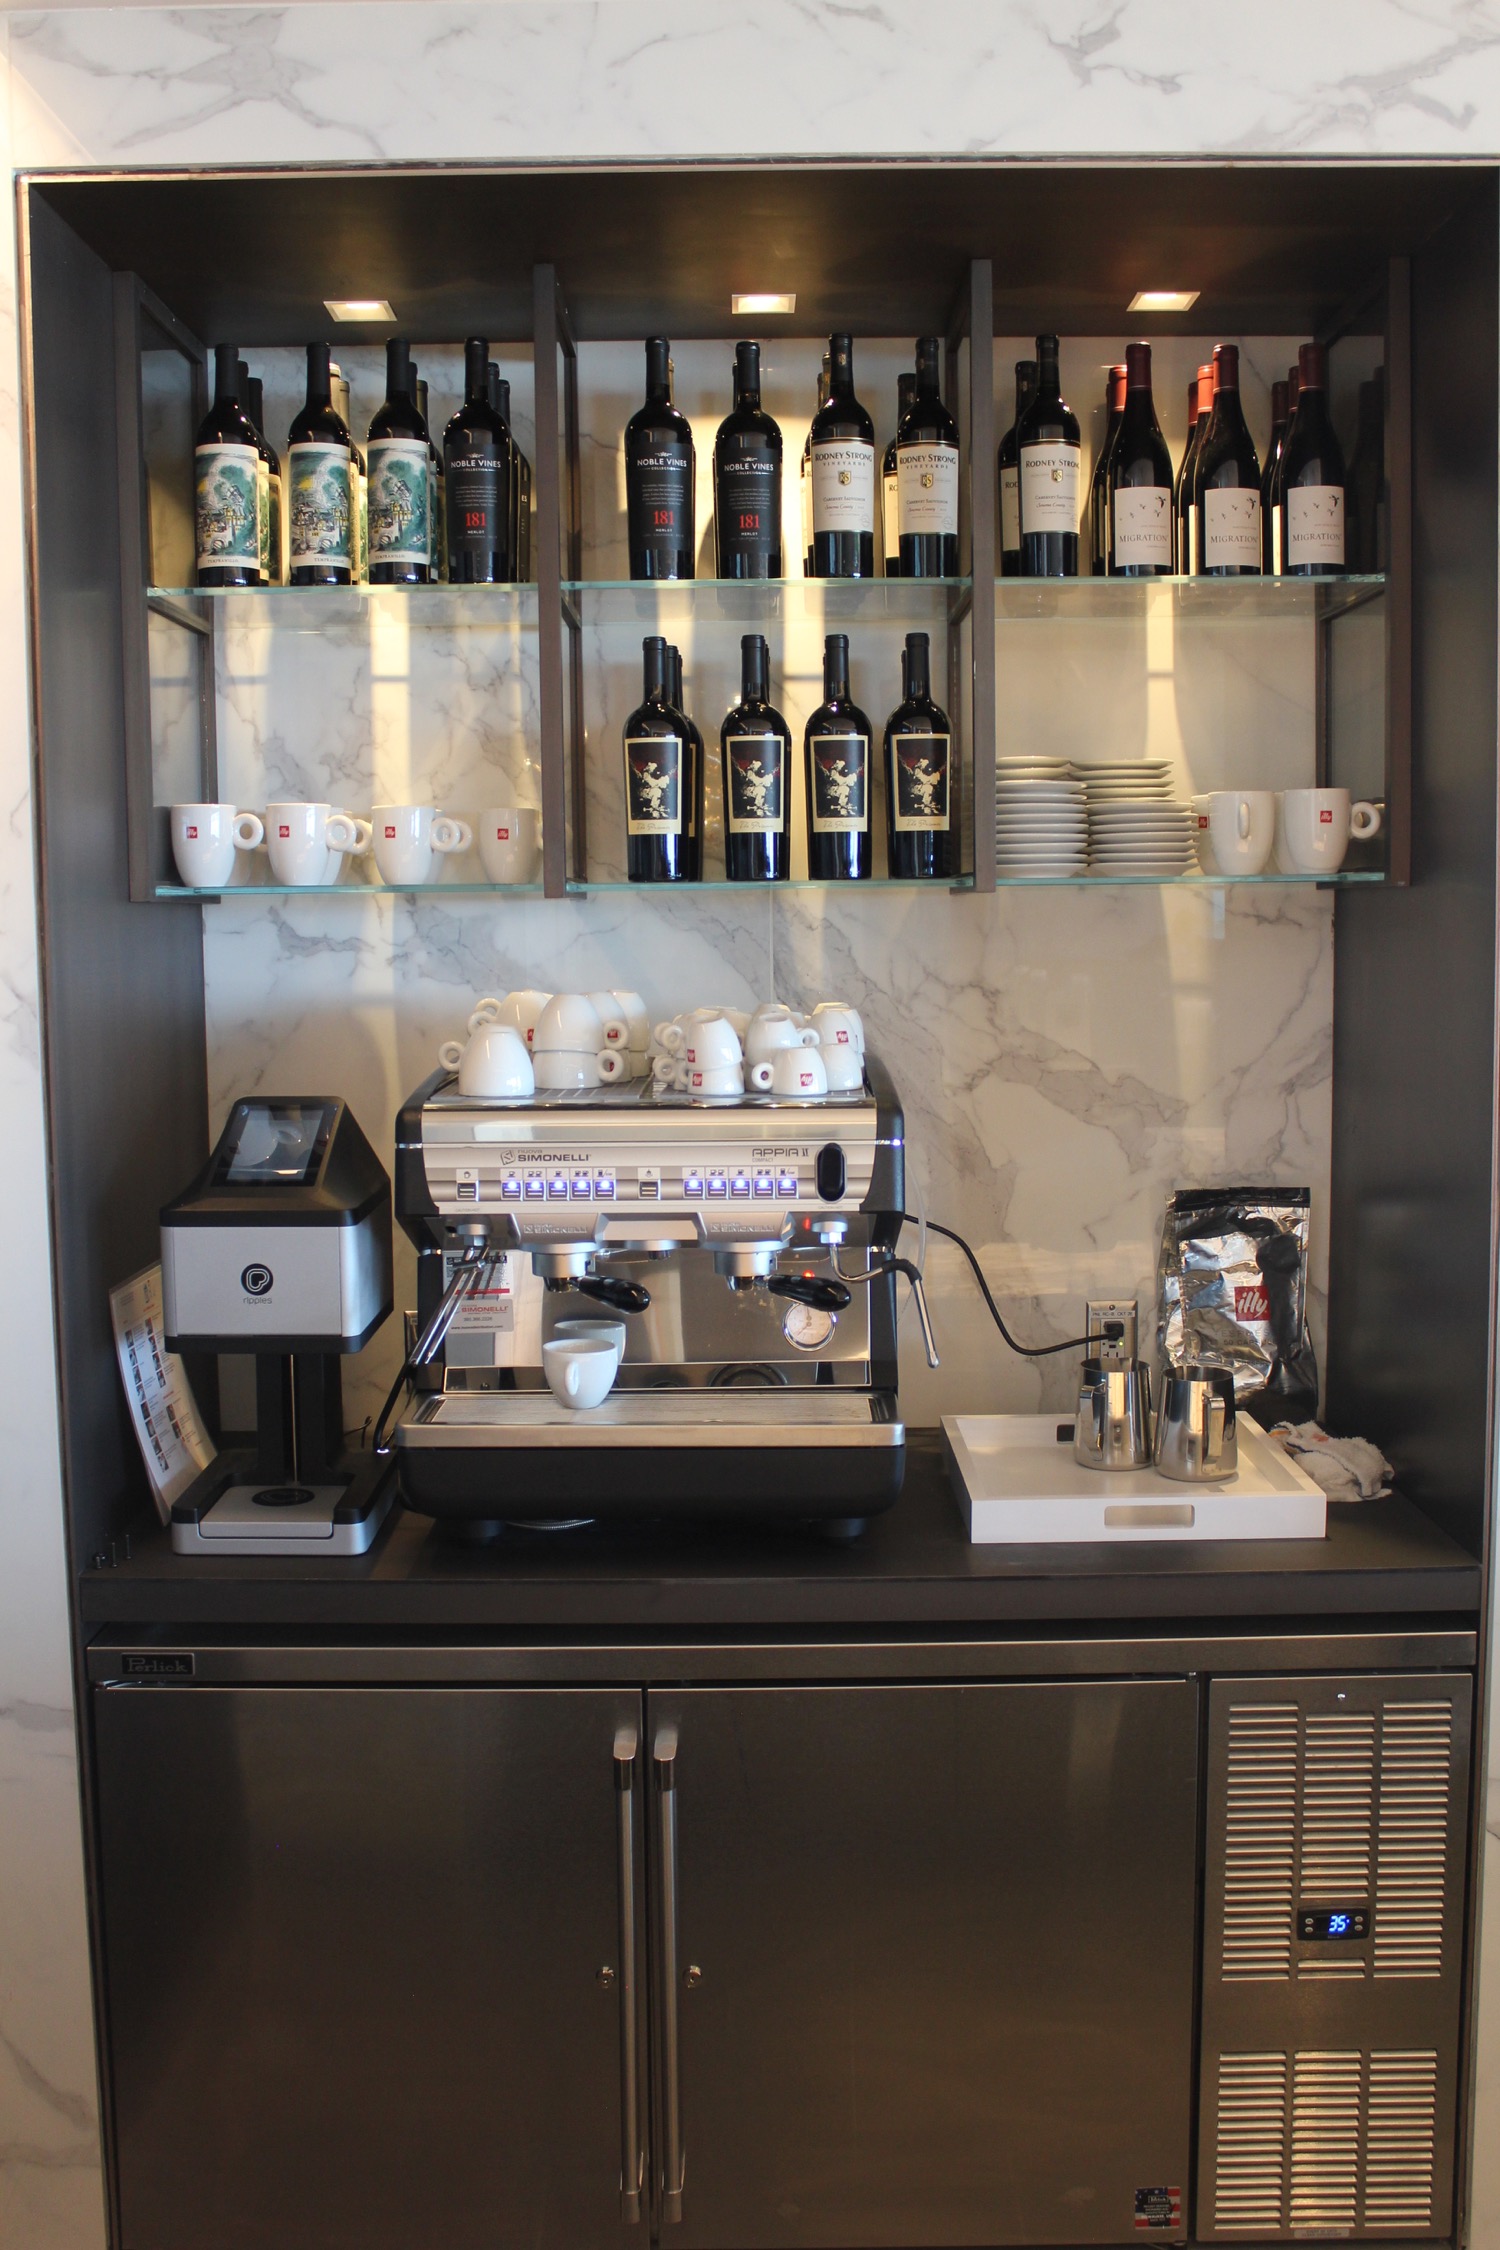 a coffee machine and bottles of wine on a shelf